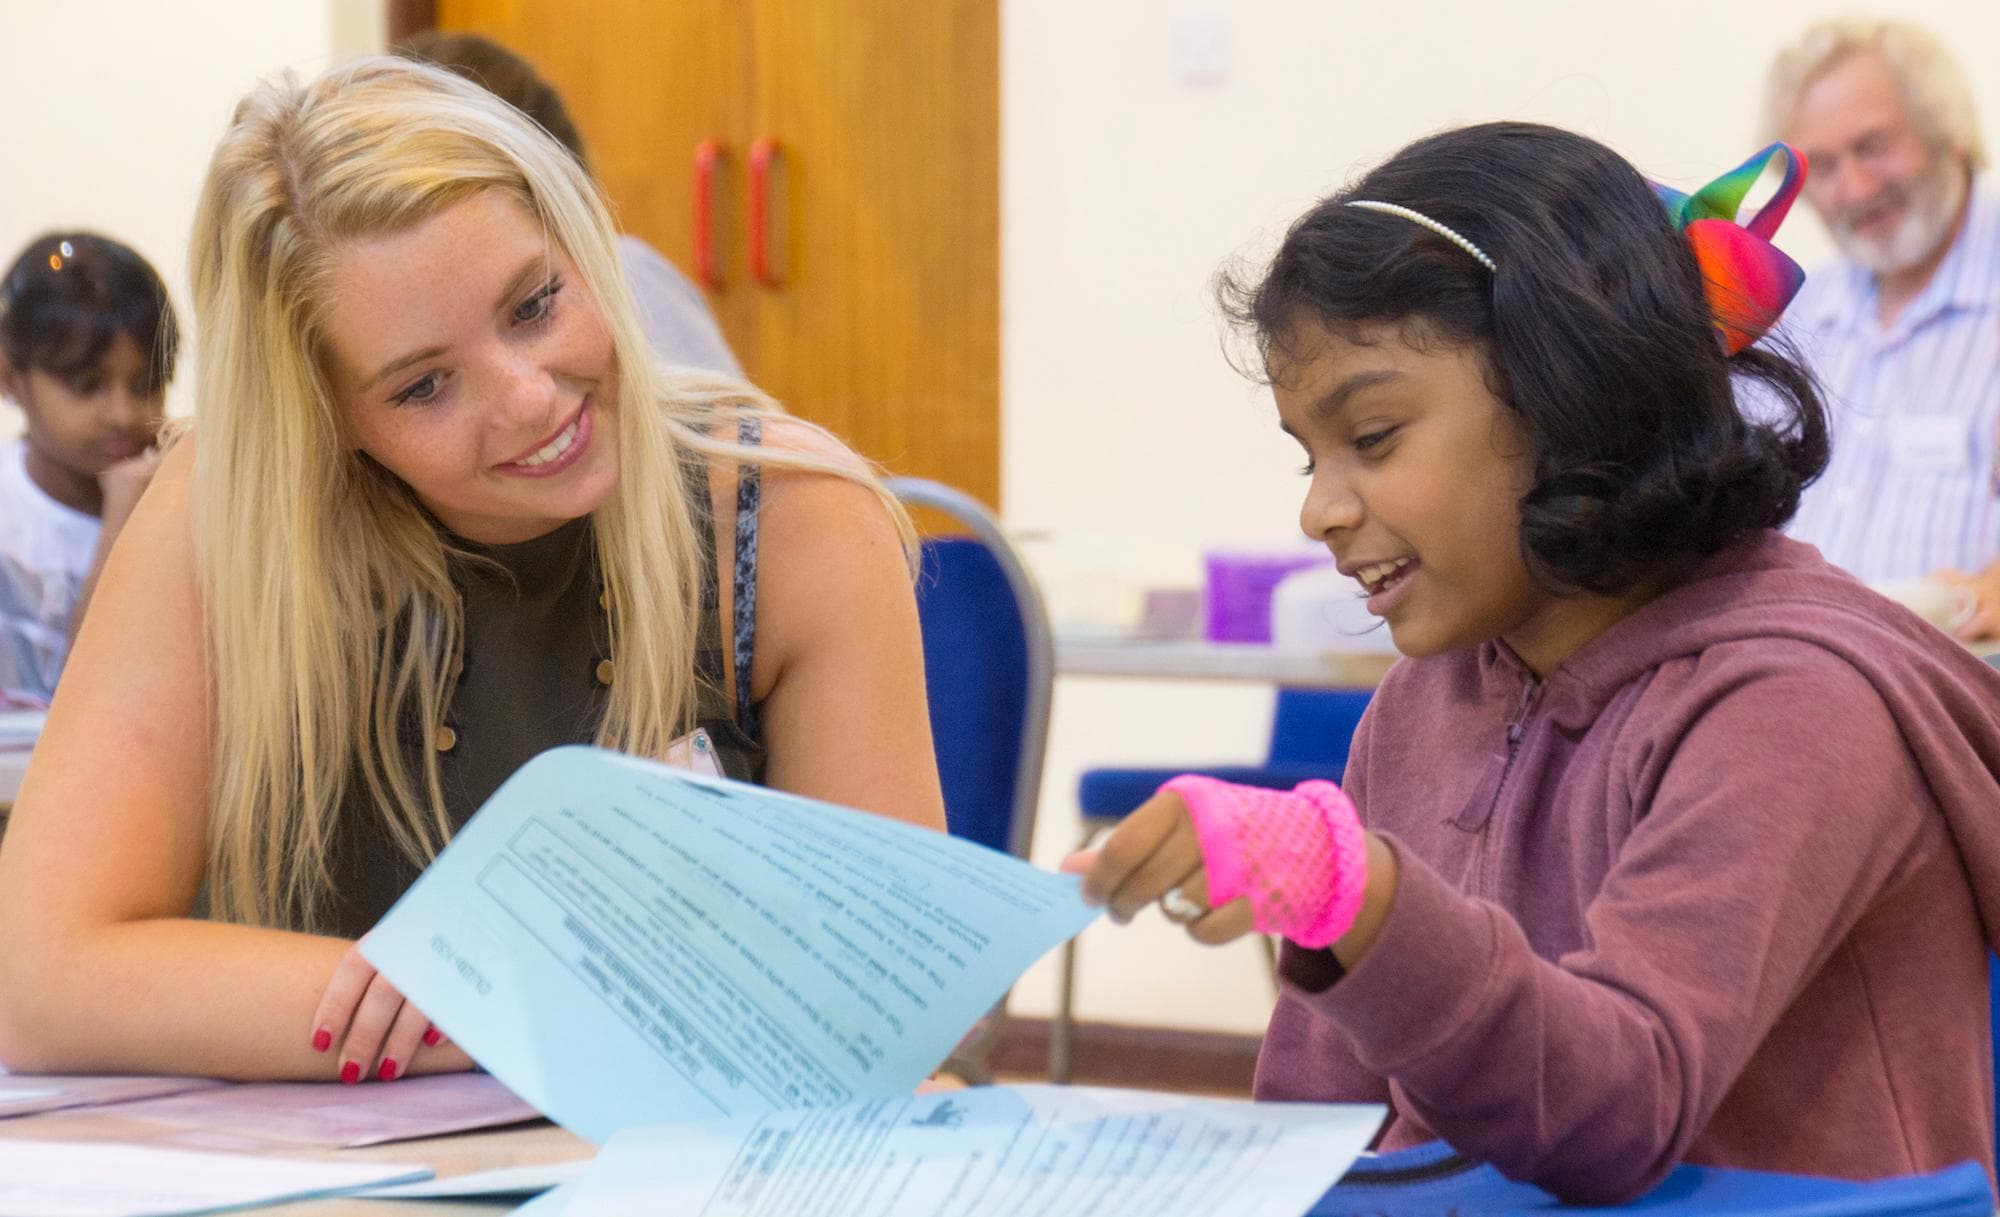 First Class Learning is the maths & English tuition franchise spreading across the UK.